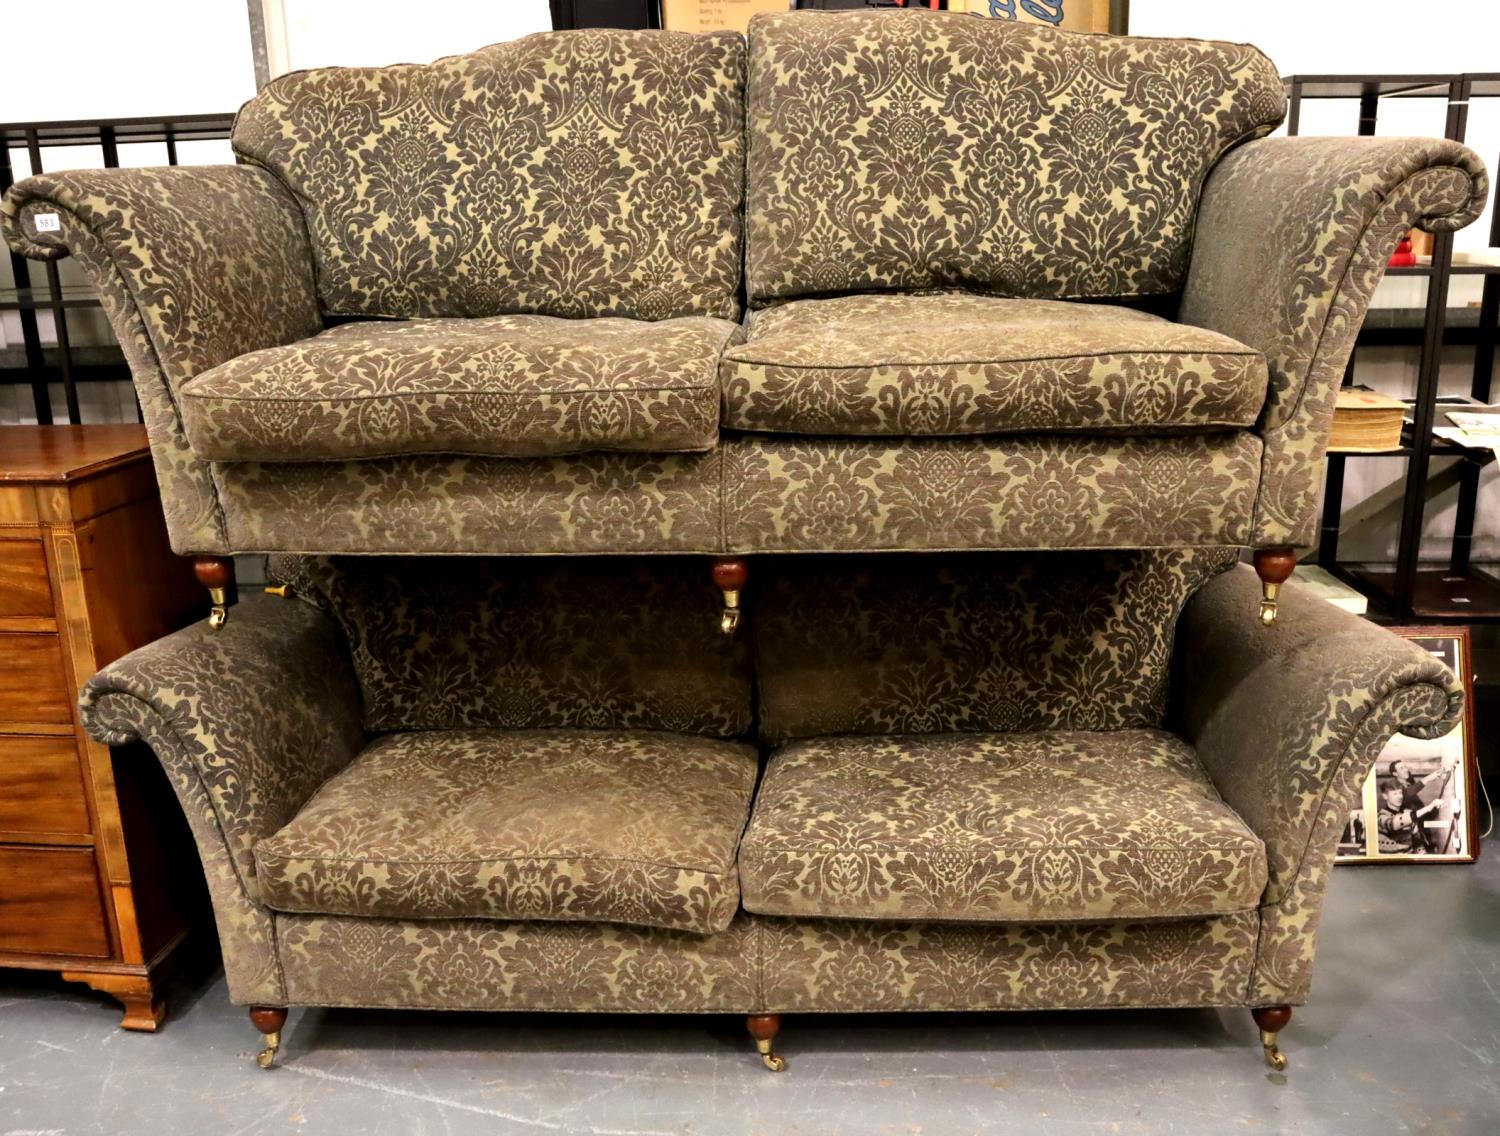 A pair of substantial contemporary sofas, upholstered in gold.brown damask. Not available for in-